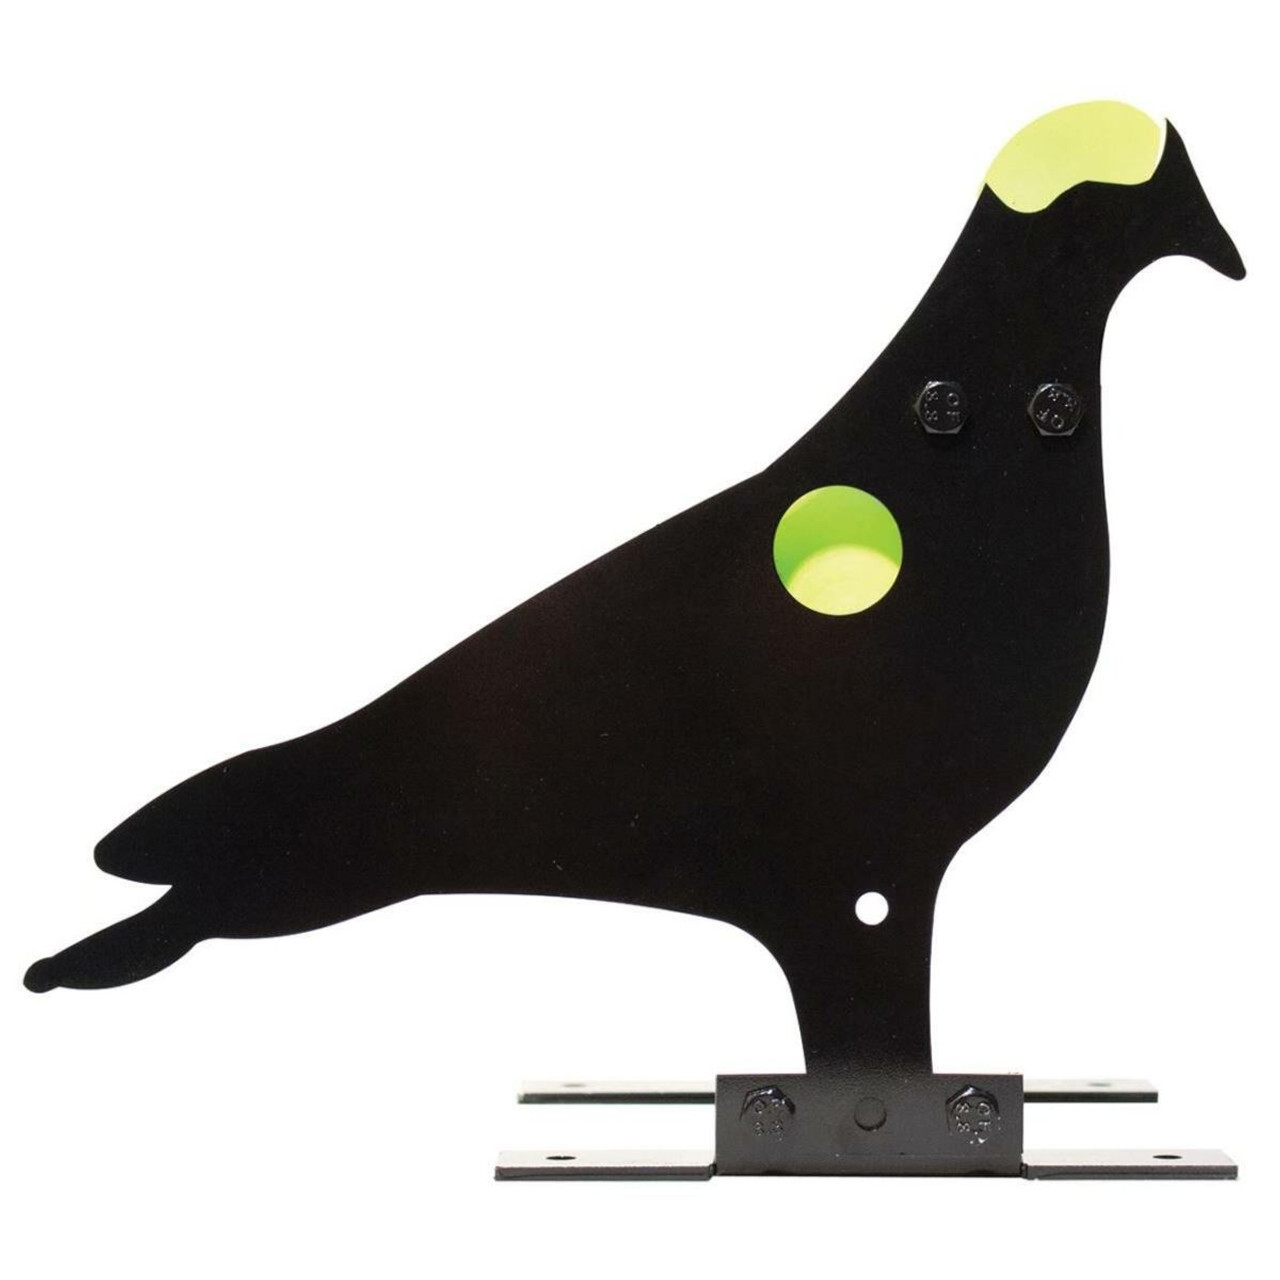 Gr8fun Kill Zone Targets Pigeon Dove Metal Silhouette with resetting paddles